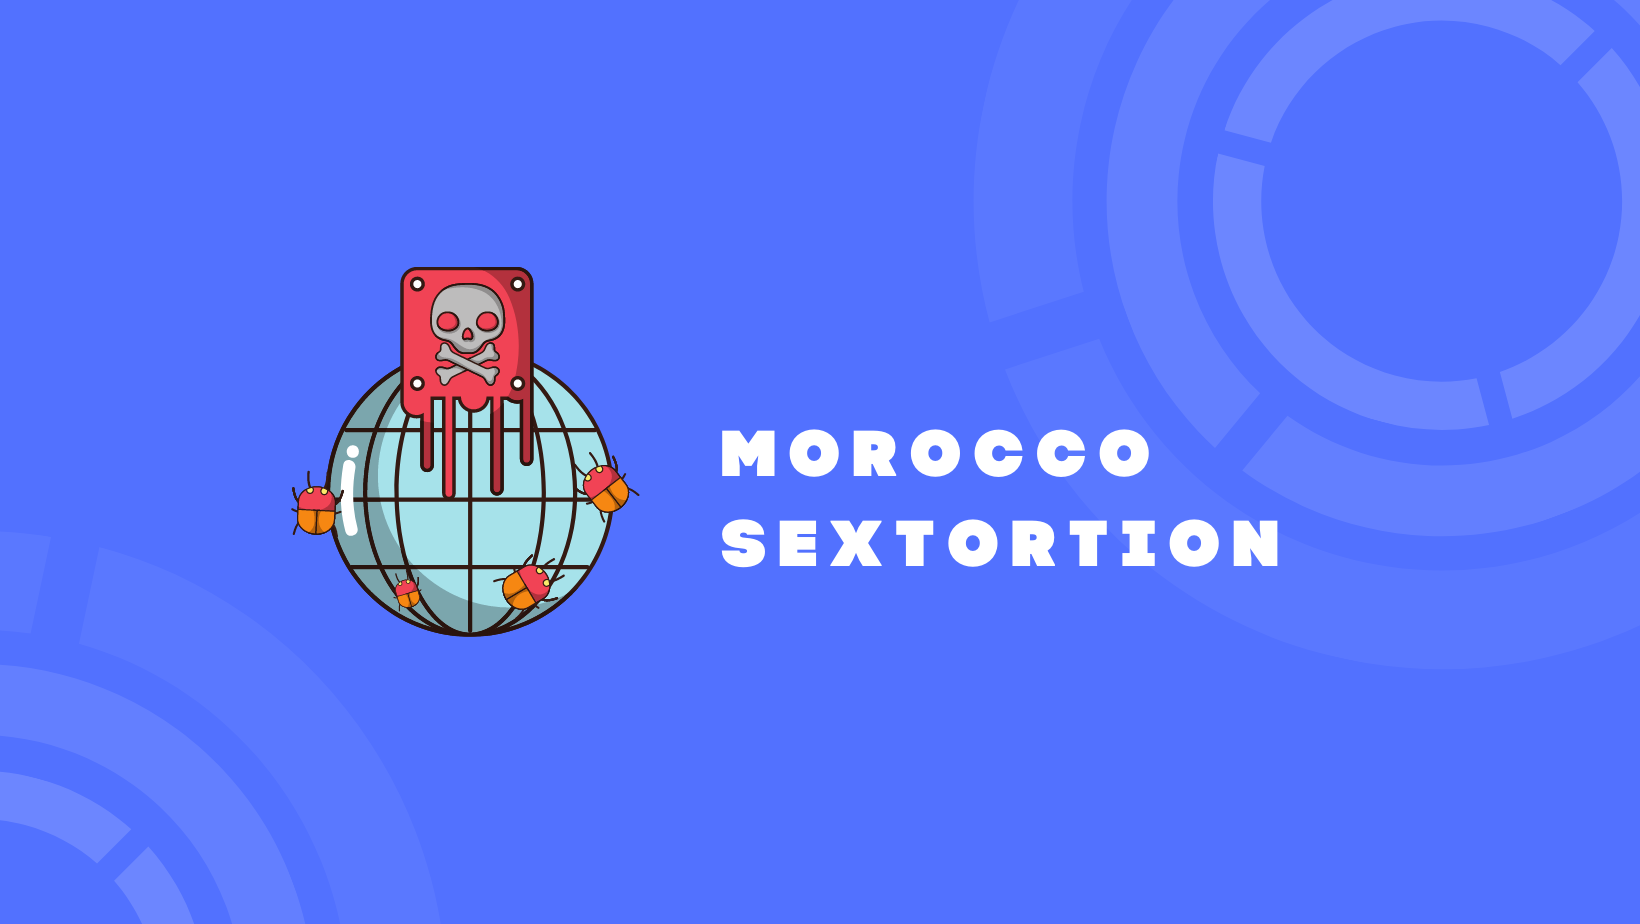 Morocco Sextortion